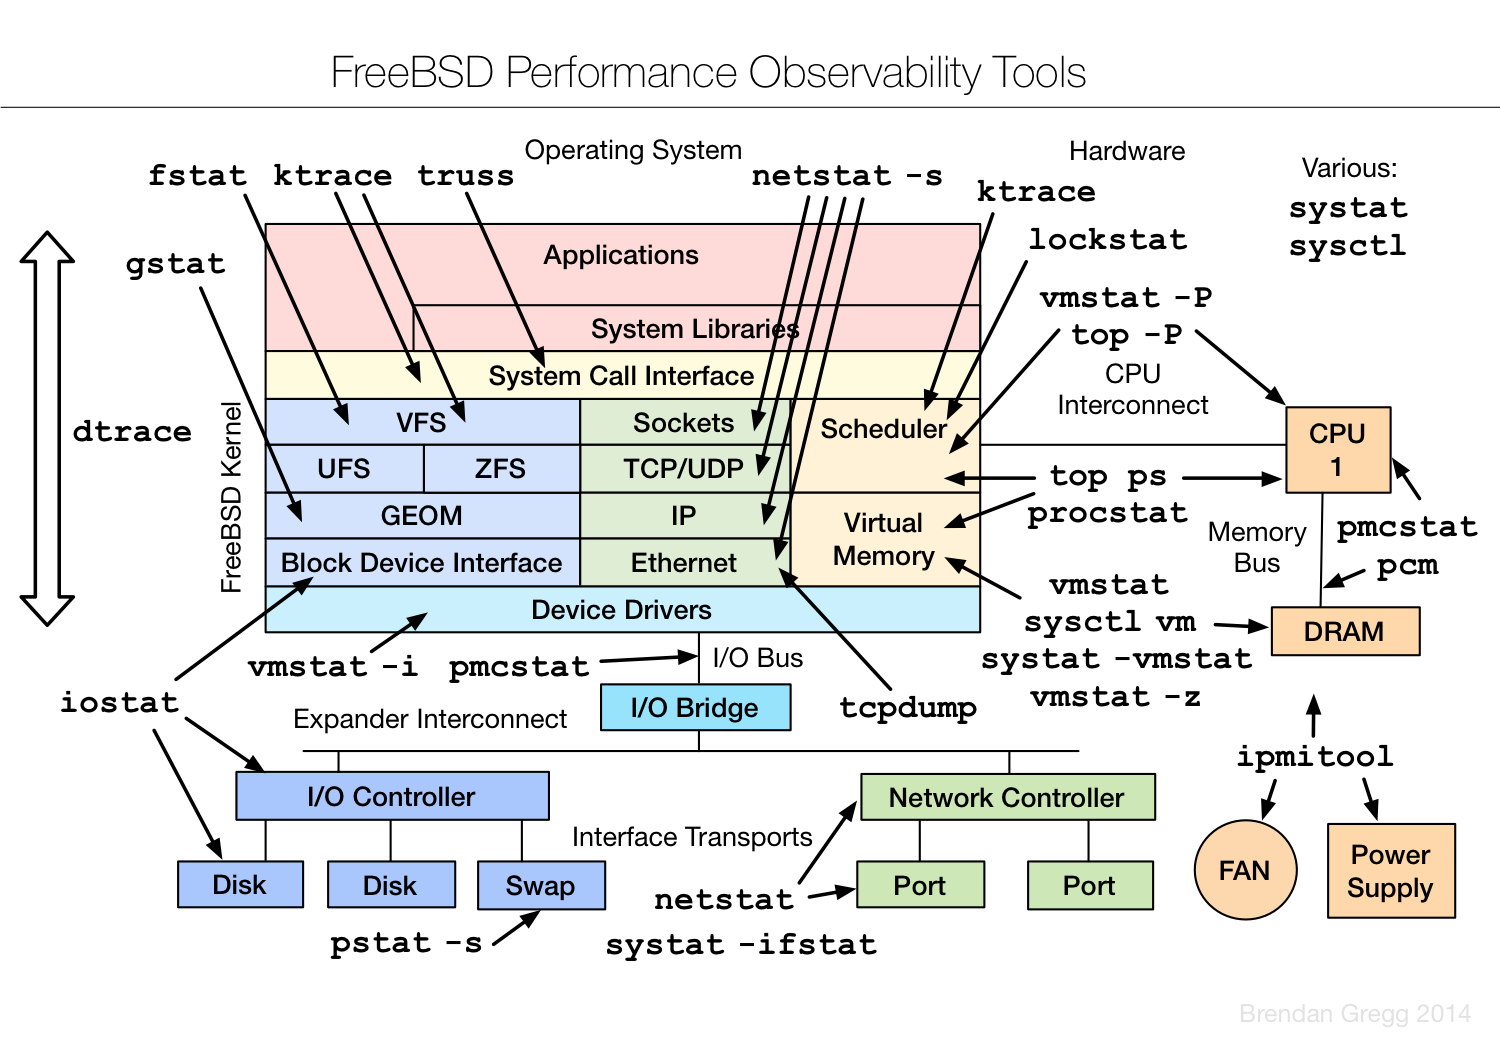 FreeBSD observability tools